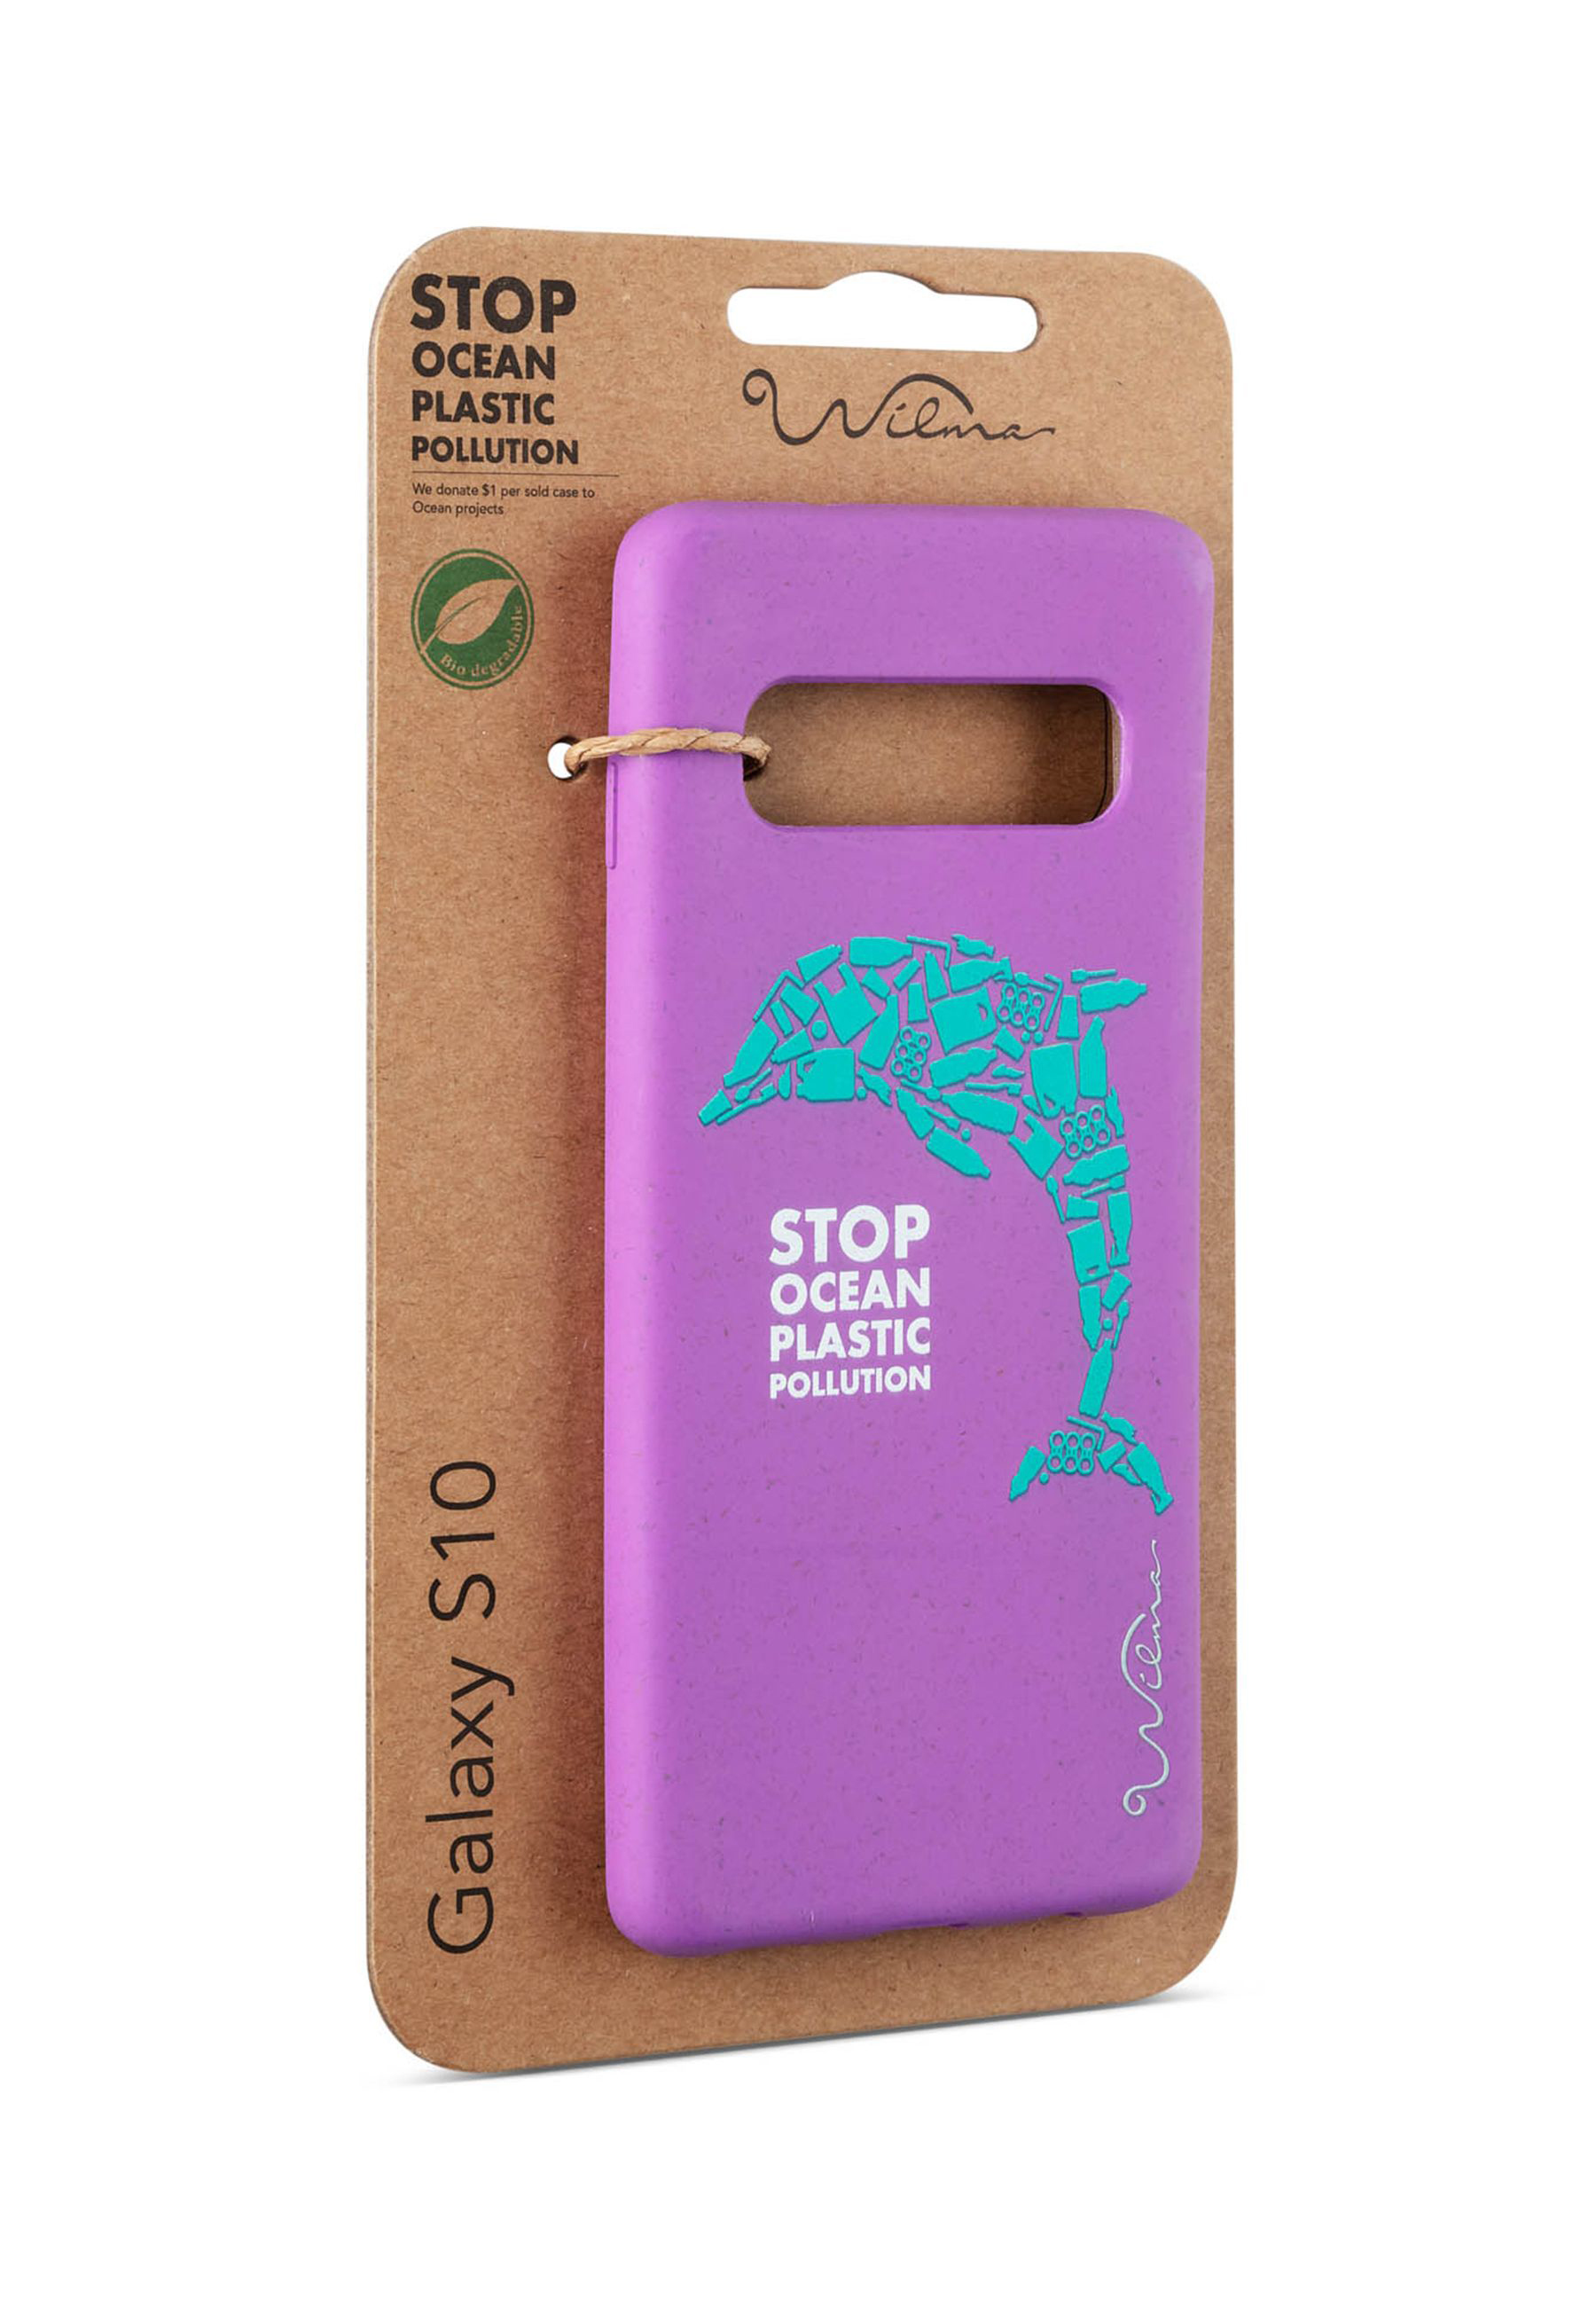 ECO FASHION BY Samsung, ORS10, Galaxy Backcover, purple S10, WILMA